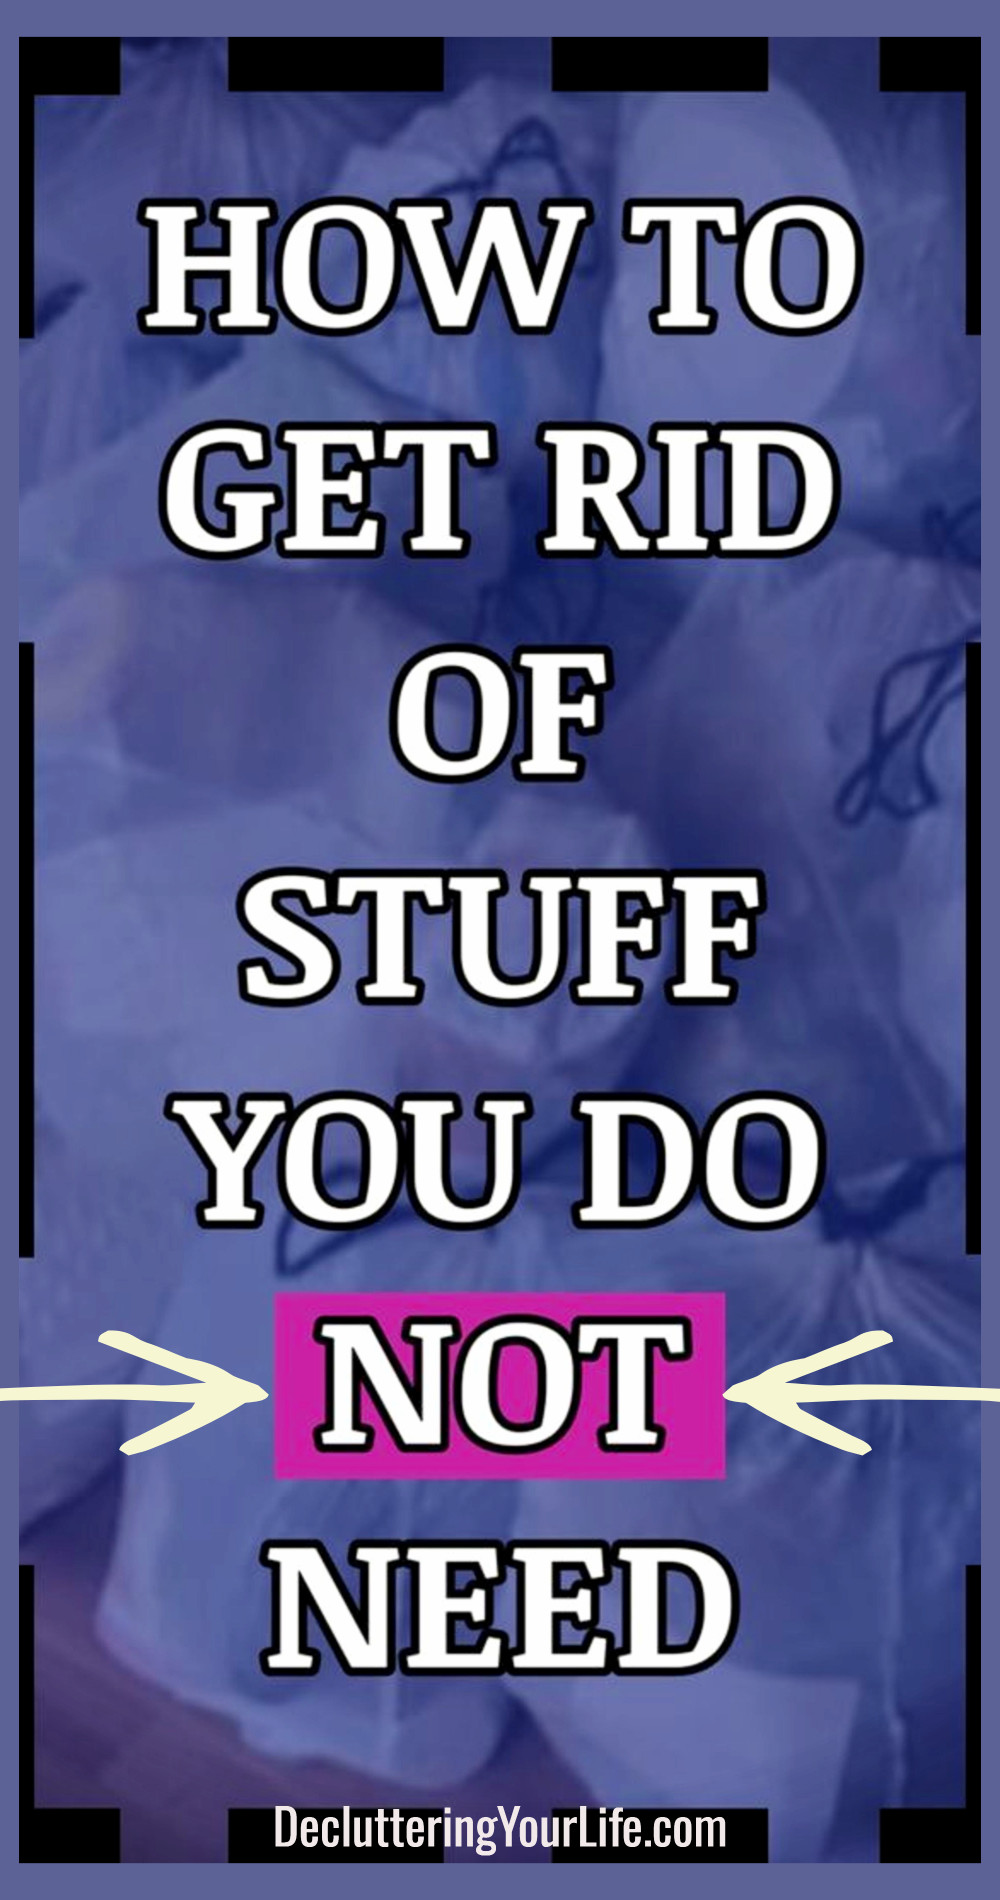 How To Get Rid Of Stuff You Do NOT Need